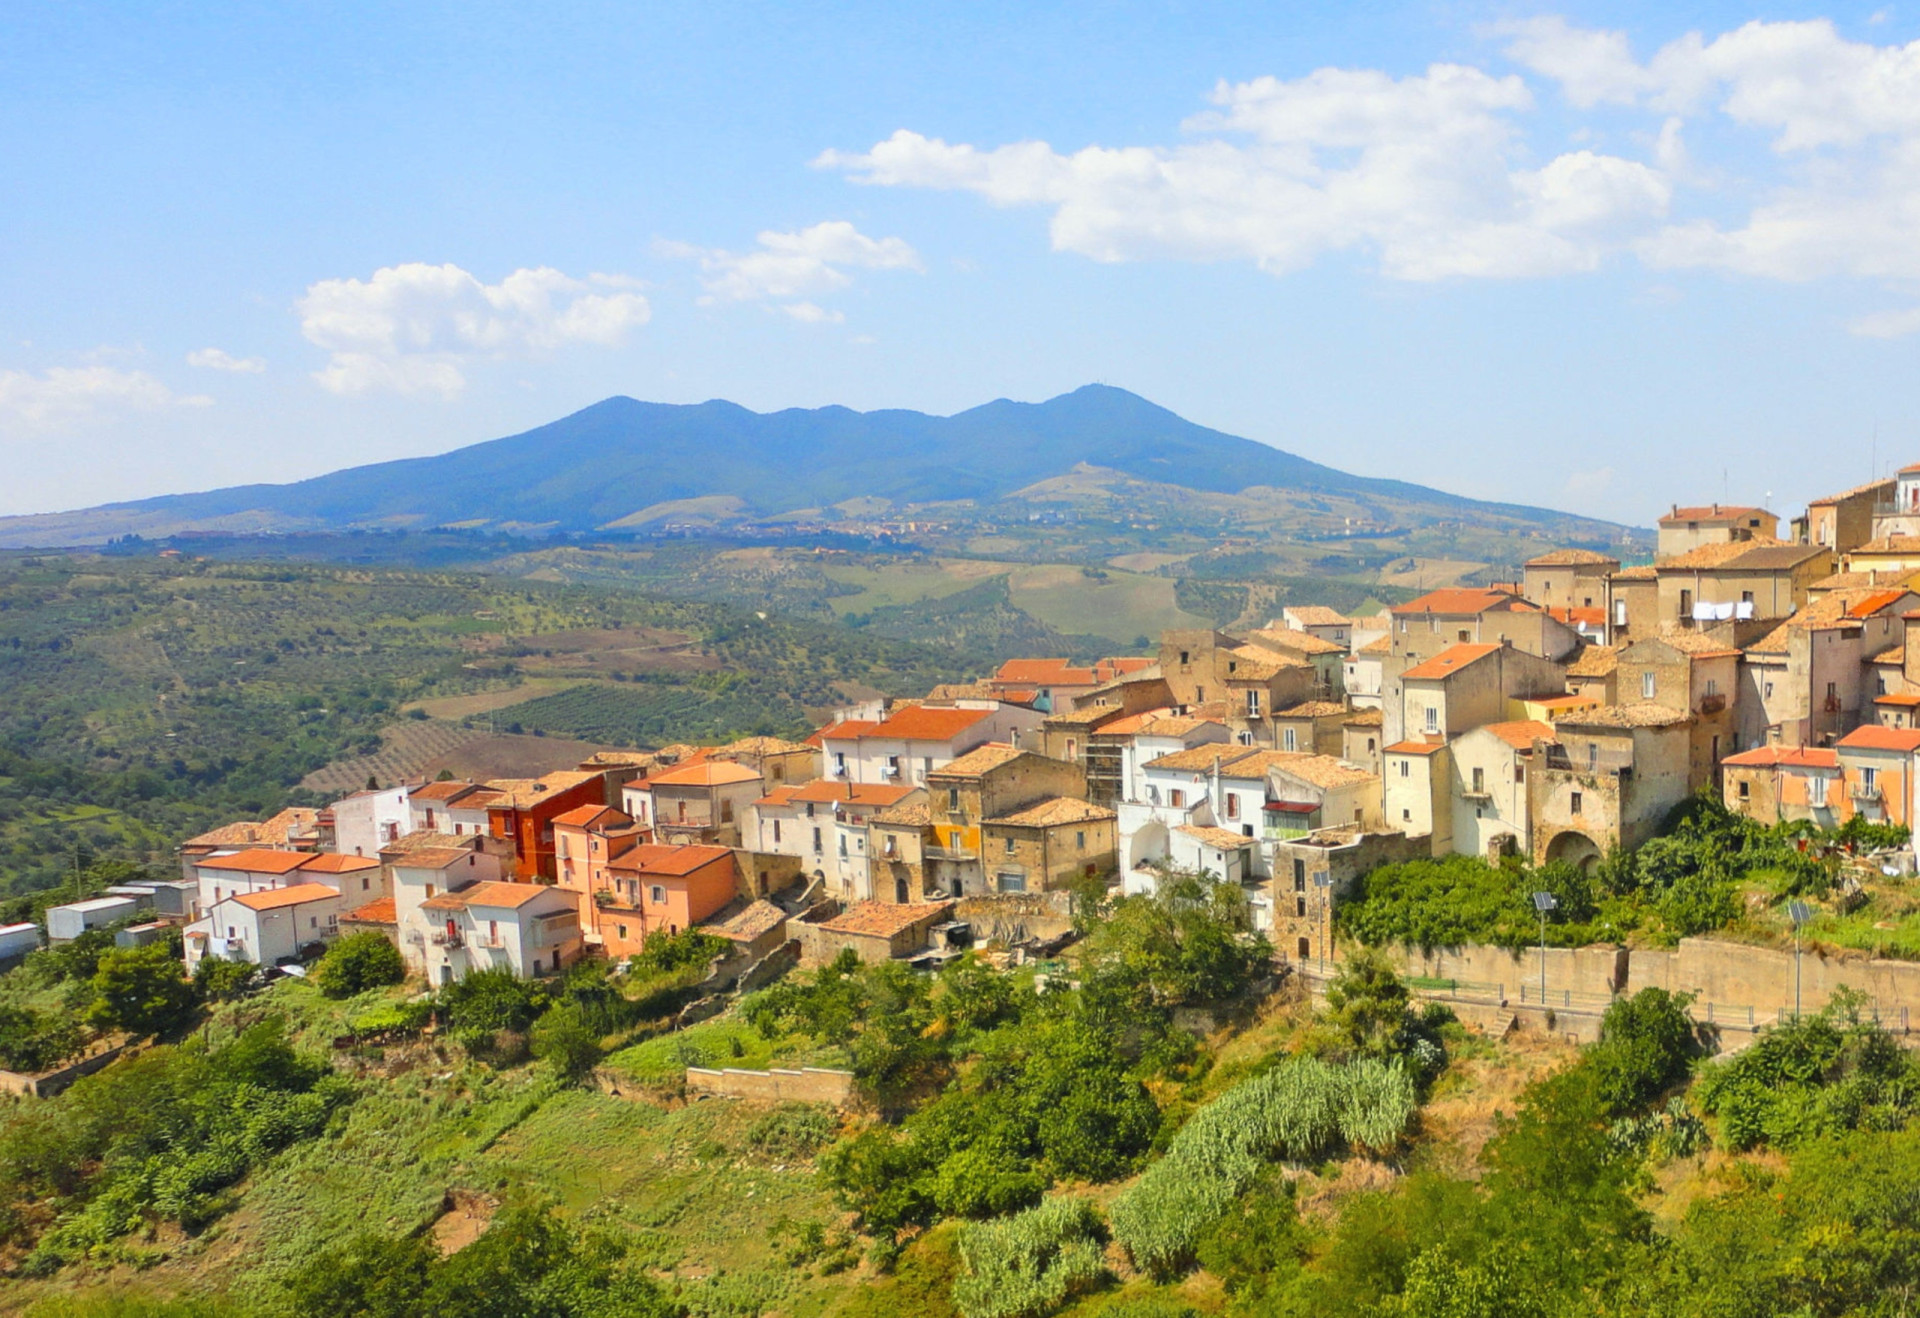 <p>The Italian countryside in the province of Potenza is dominated by Monte Vulture, an extinct volcano that serves as an impressive backdrop to numerous towns and villages, including hilltop Ripacandida (pictured). Vulture last erupted 40,000 years ago.</p> <p>Sources: (European Catalogue of Volcanoes) (Smithsonian Institution) (Science Struck) (Explore Volcanoes) (Euronews) (National Geographic Society) (Britannica) (DW)</p> <p>See also: <a href="https://www.starsinsider.com/travel/272798/europes-most-picturesque-small-towns-and-villages">Europe's most picturesque small towns and villages</a></p><p><a href="https://www.msn.com/en-us/community/channel/vid-7xx8mnucu55yw63we9va2gwr7uihbxwc68fxqp25x6tg4ftibpra?cvid=94631541bc0f4f89bfd59158d696ad7e">Follow us and access great exclusive content every day</a></p>